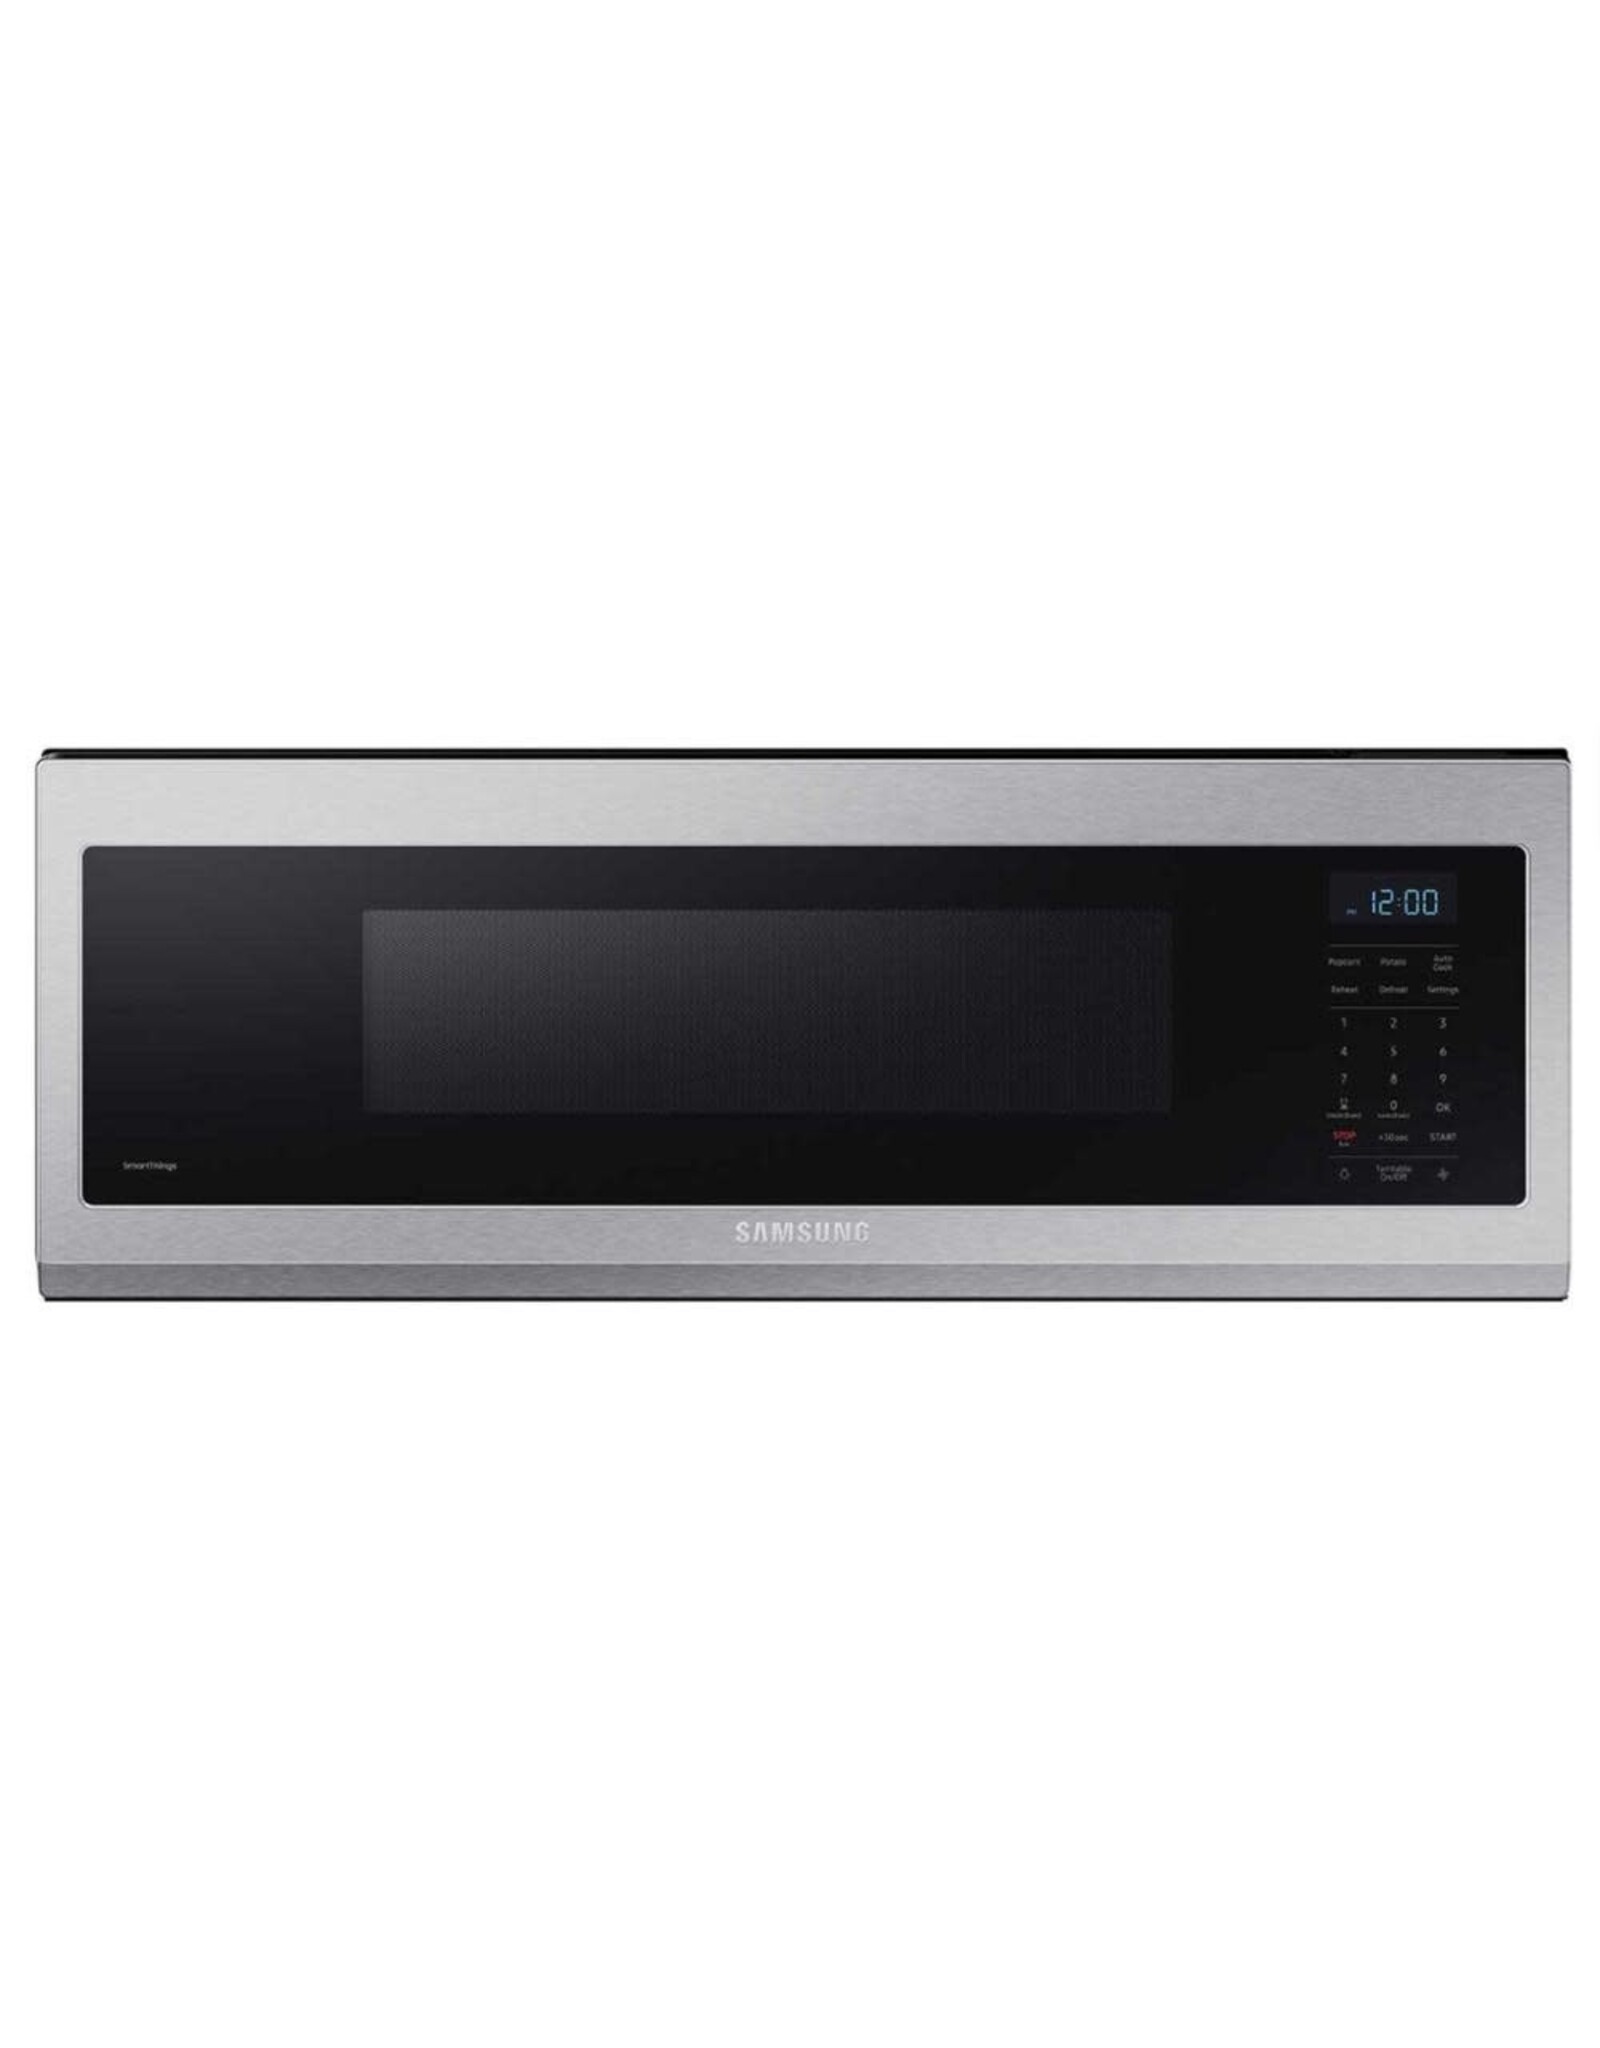 SAMSUNG ME11A7510DS  1.1 cu. ft. Smart SLIM OTR with 400 CFM and Wi-Fi Smart Control in Fingerprint Resistant Stainless Steel